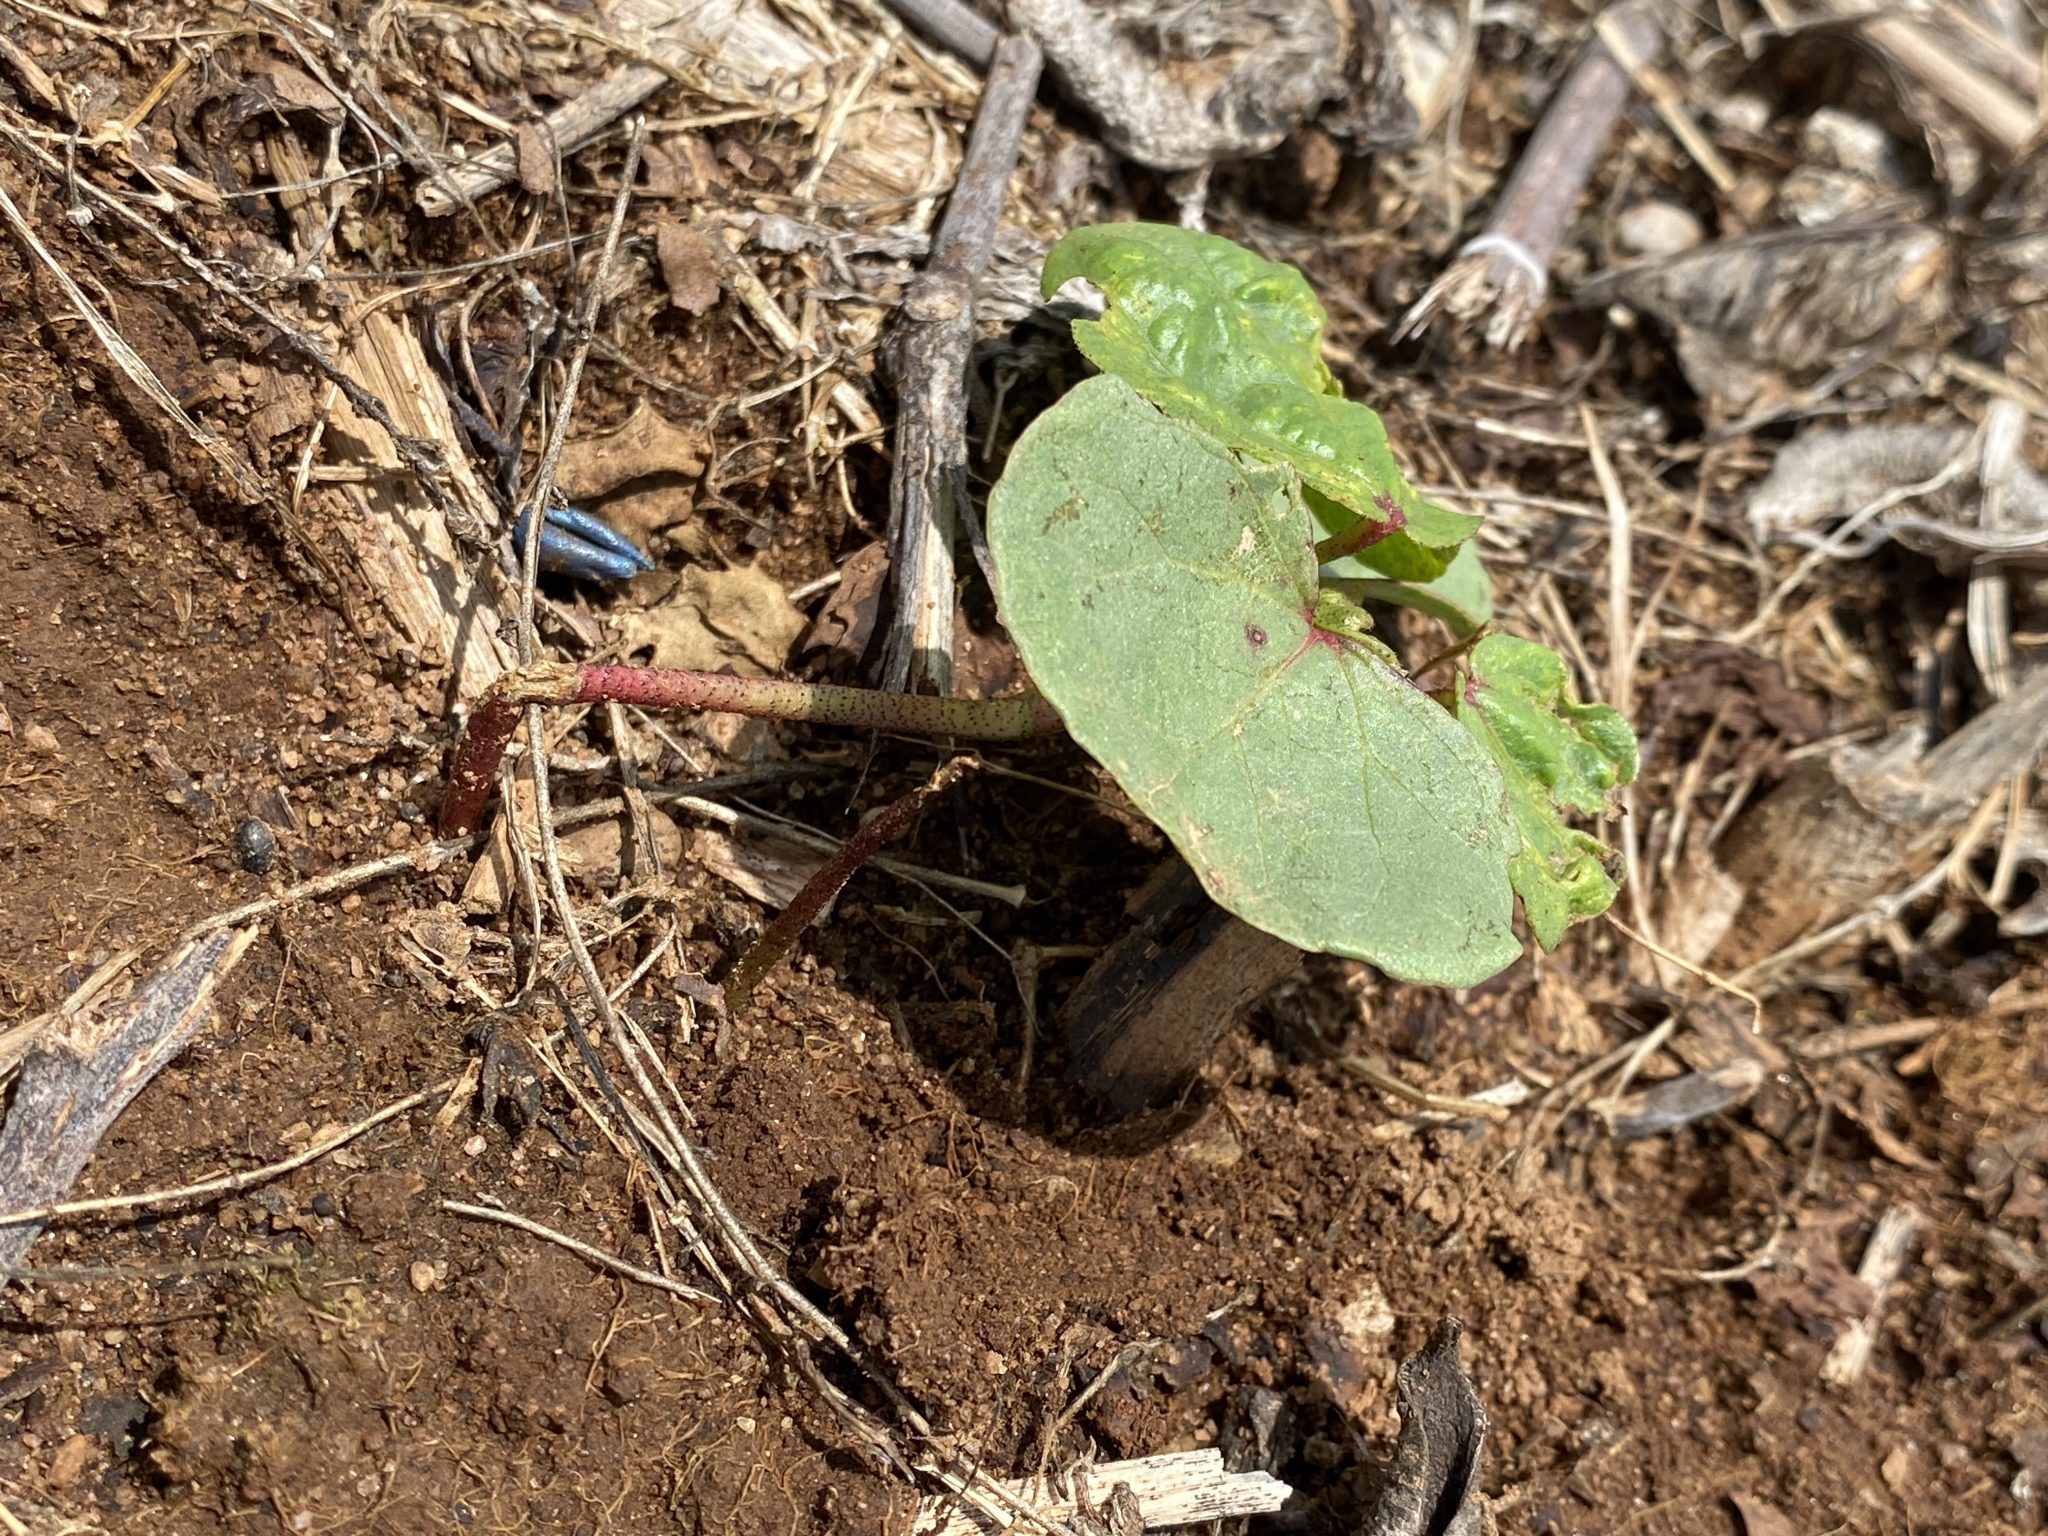 Cotton seedling damaged by grasshoppers.